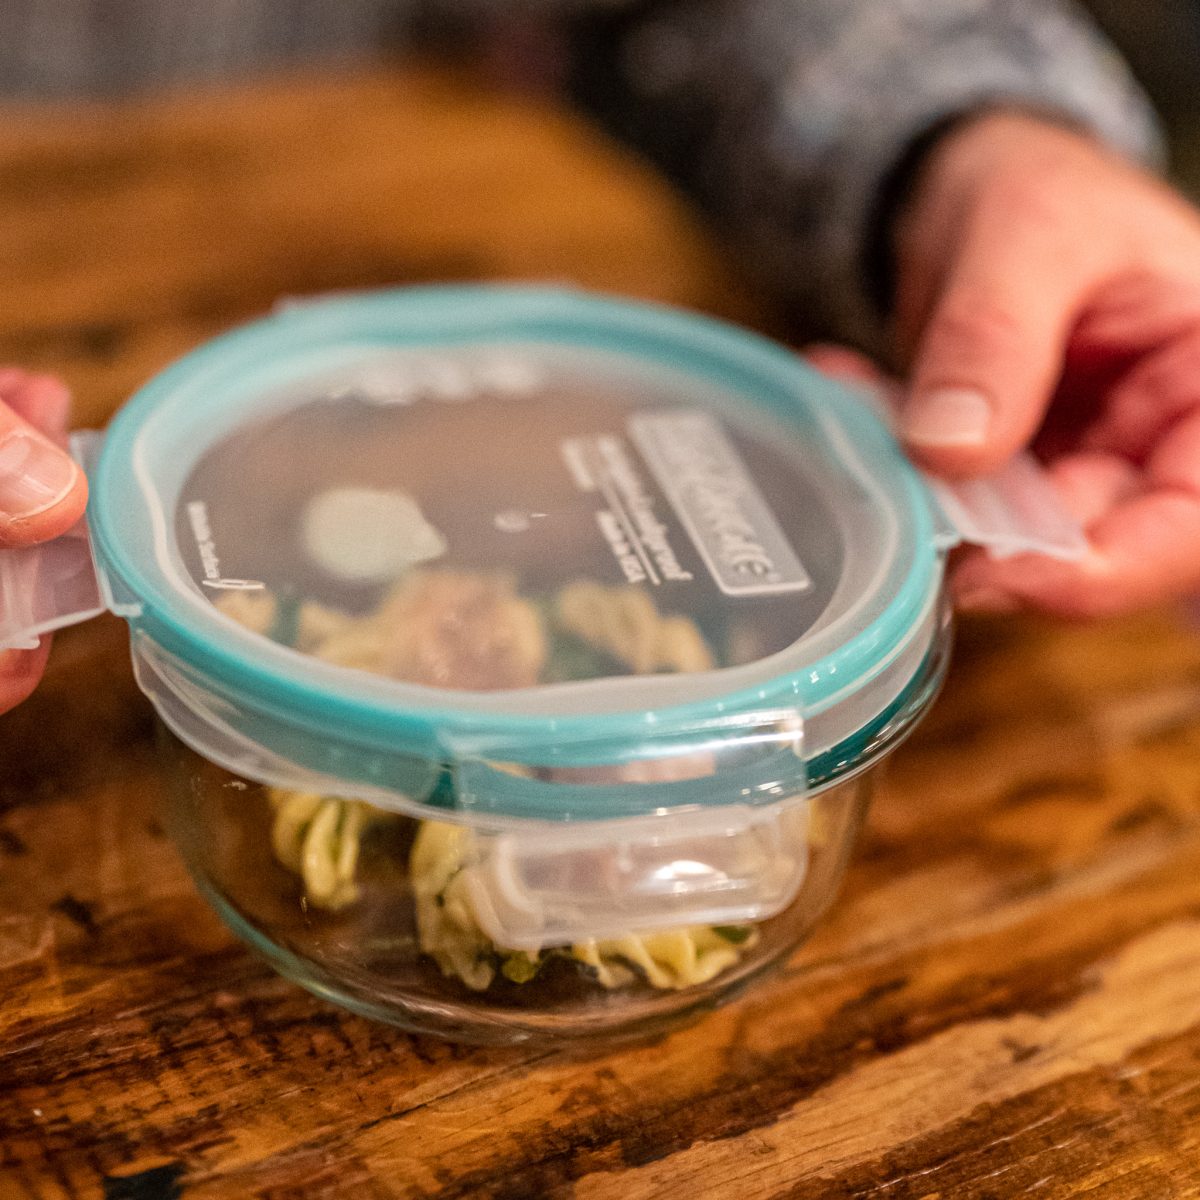 Eating out sustainably, tupperware